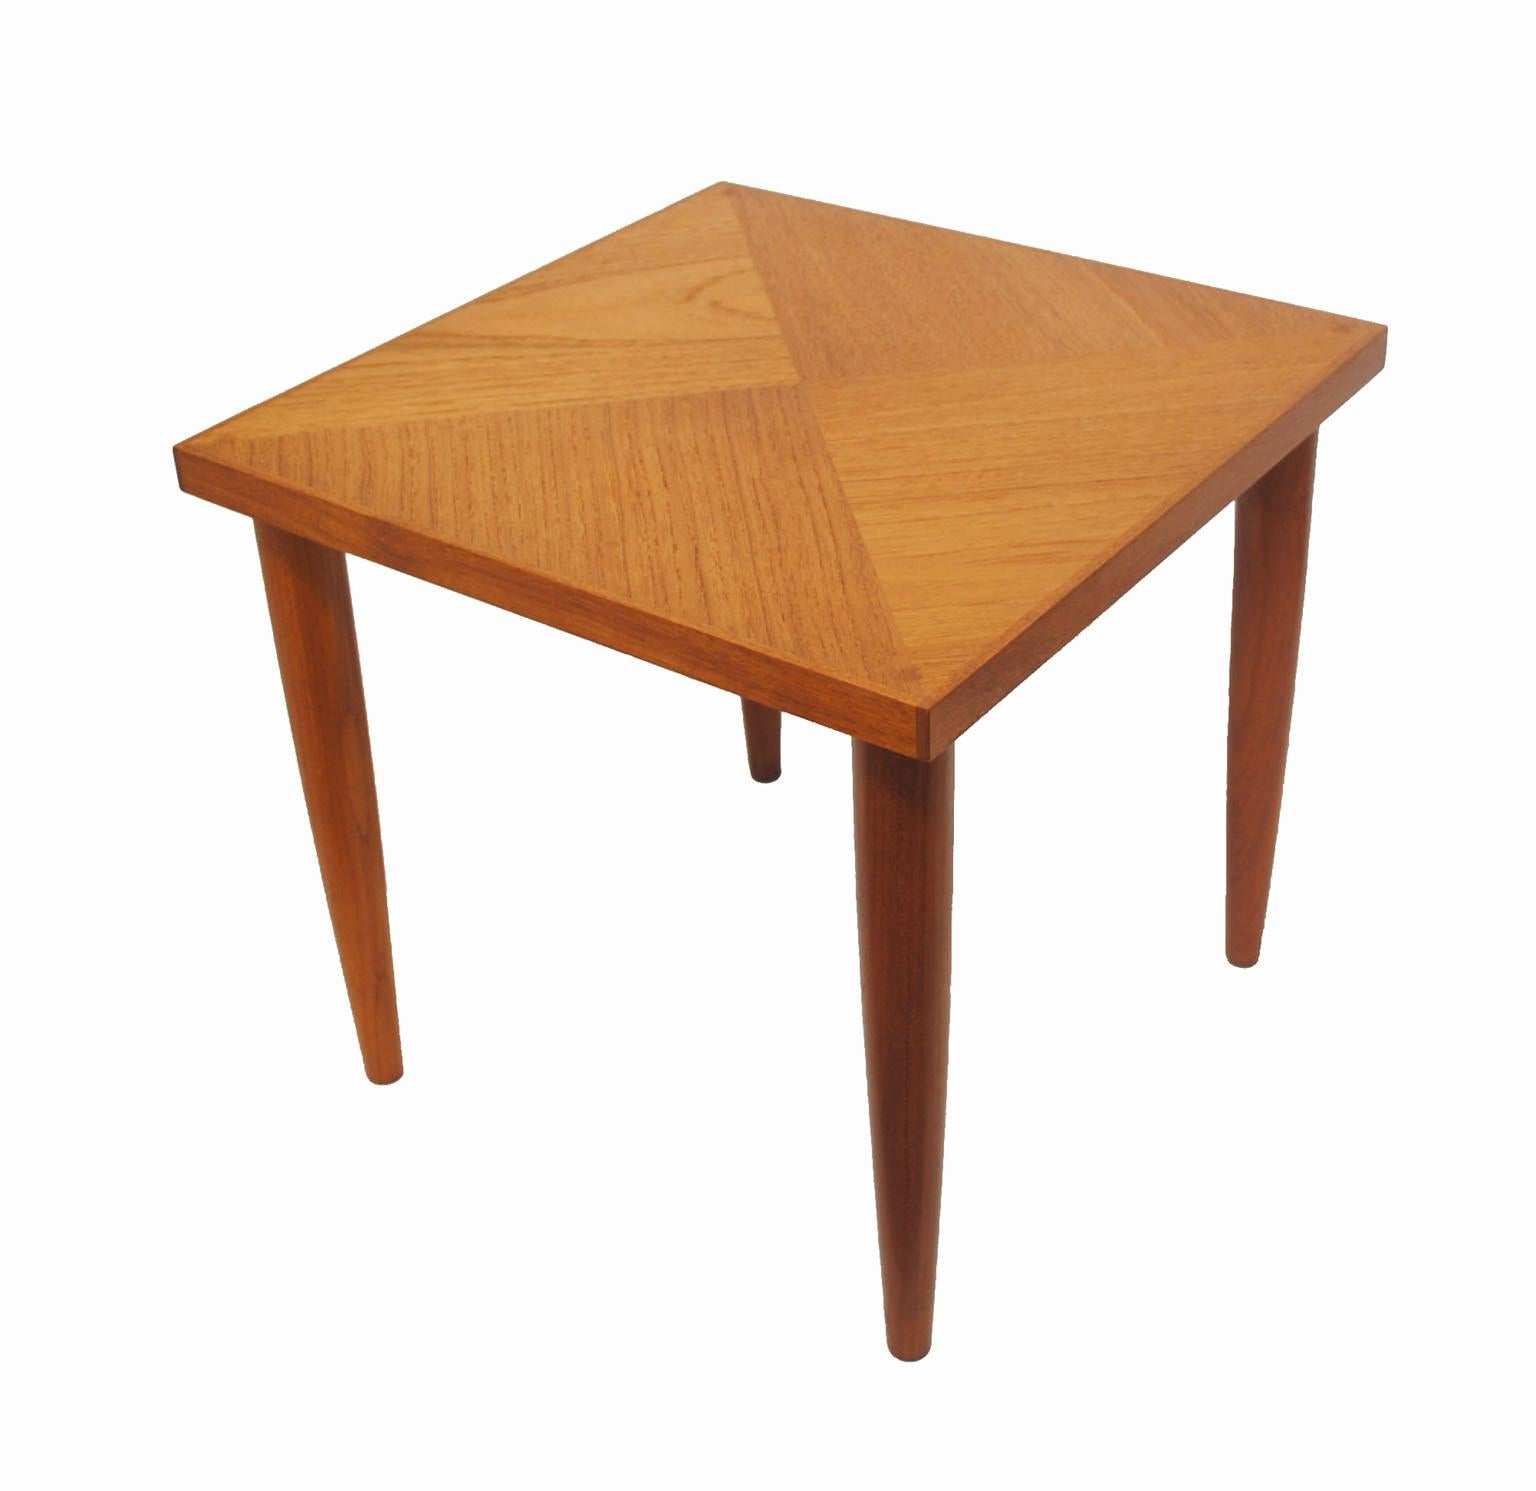 1950-1960s Teak Occasional Side Tables, Pair In Excellent Condition For Sale In Winnipeg, Manitoba